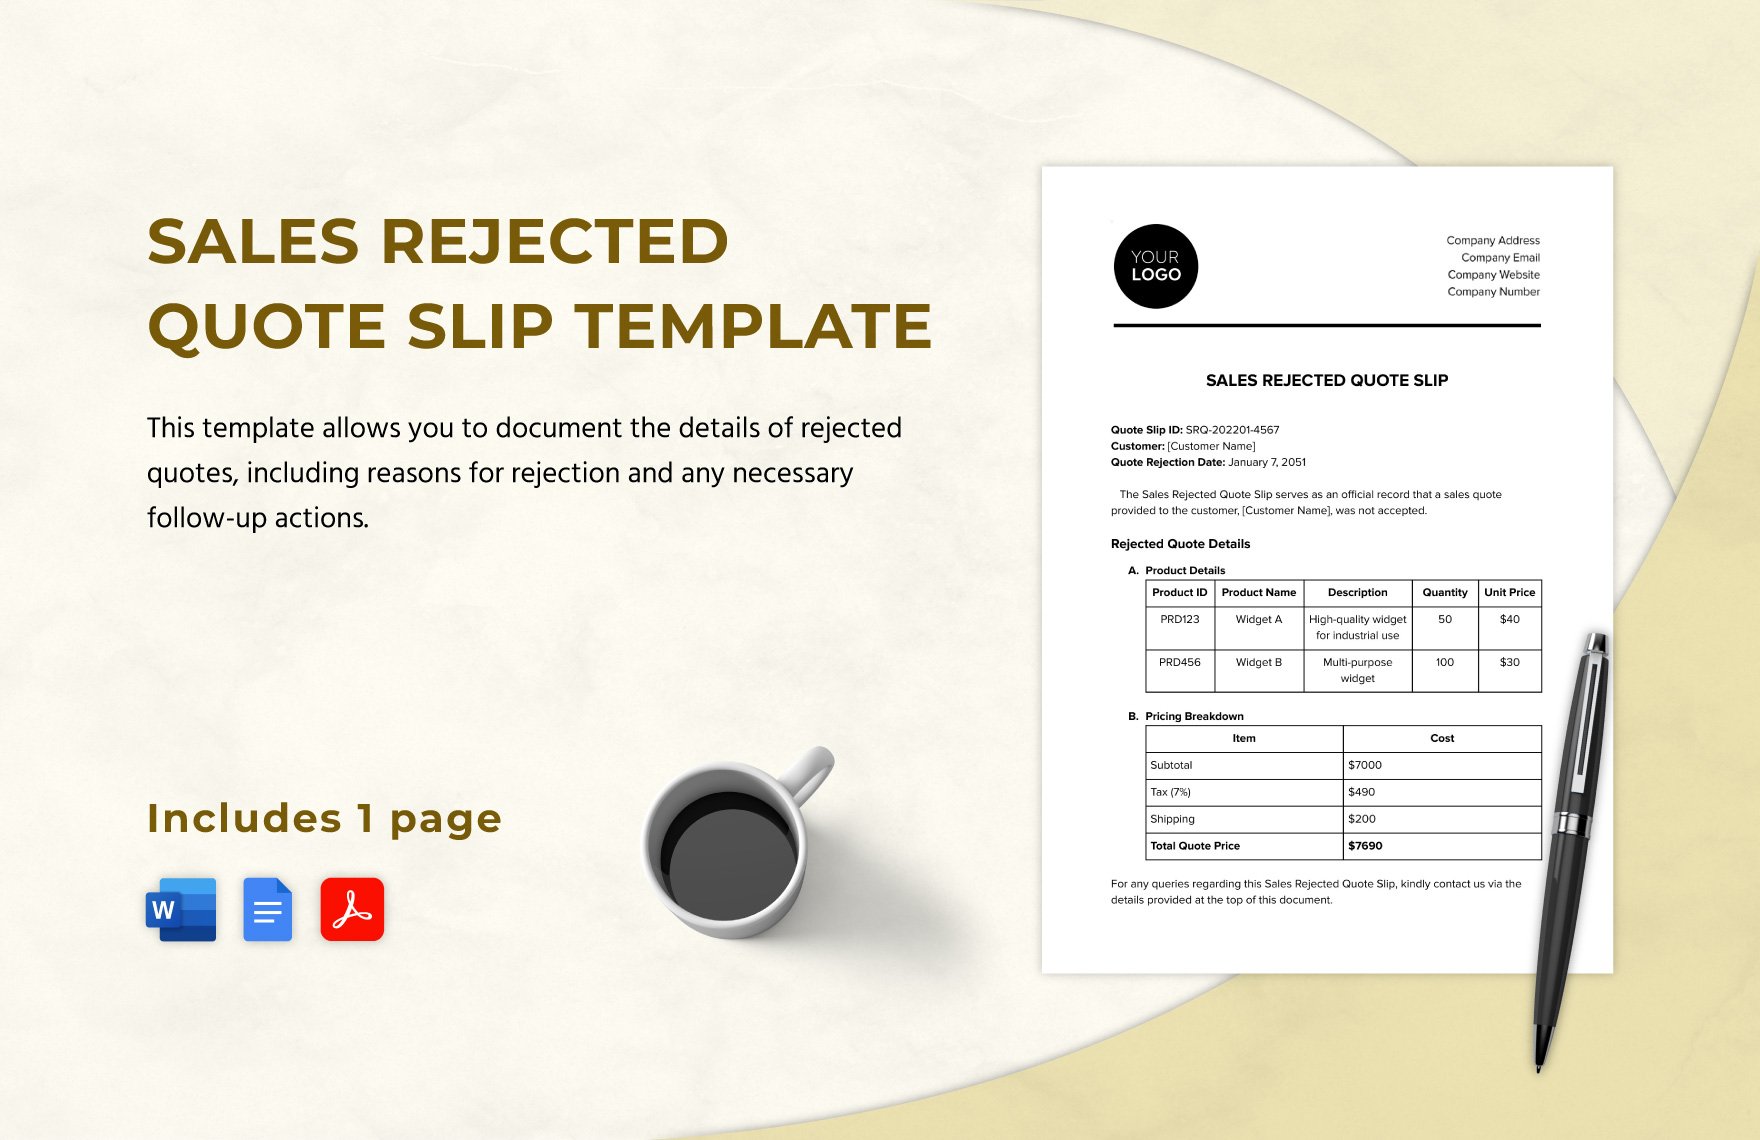 Sales Rejected Quote Slip Template in Word, Google Docs, PDF